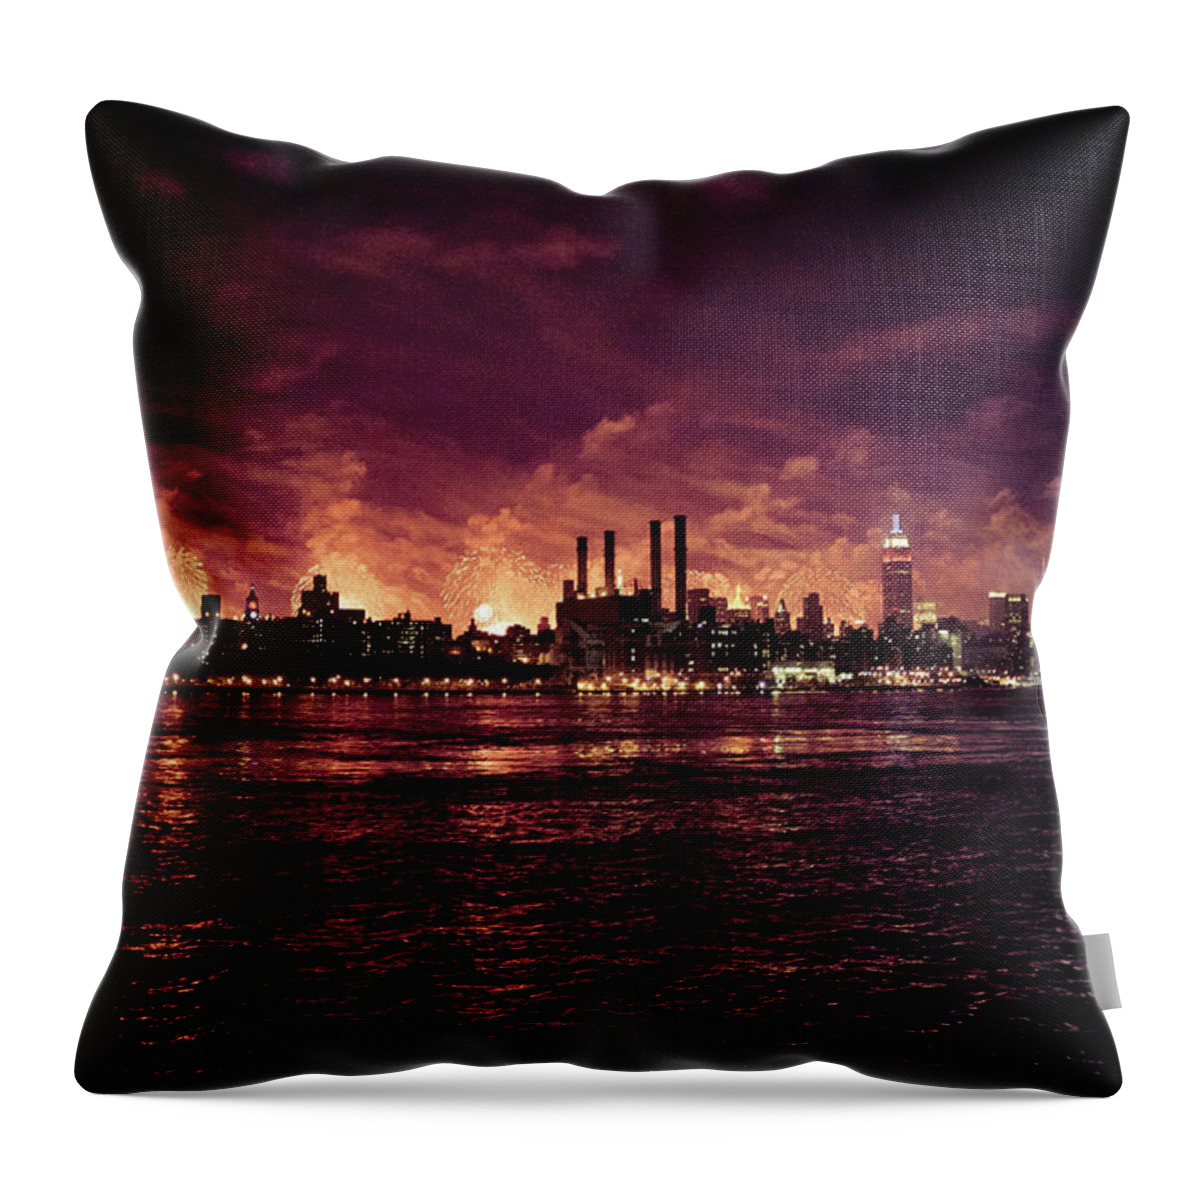 Firework Display Throw Pillow featuring the photograph Fourth Of July Fireworks Behind by Jonathan Percy